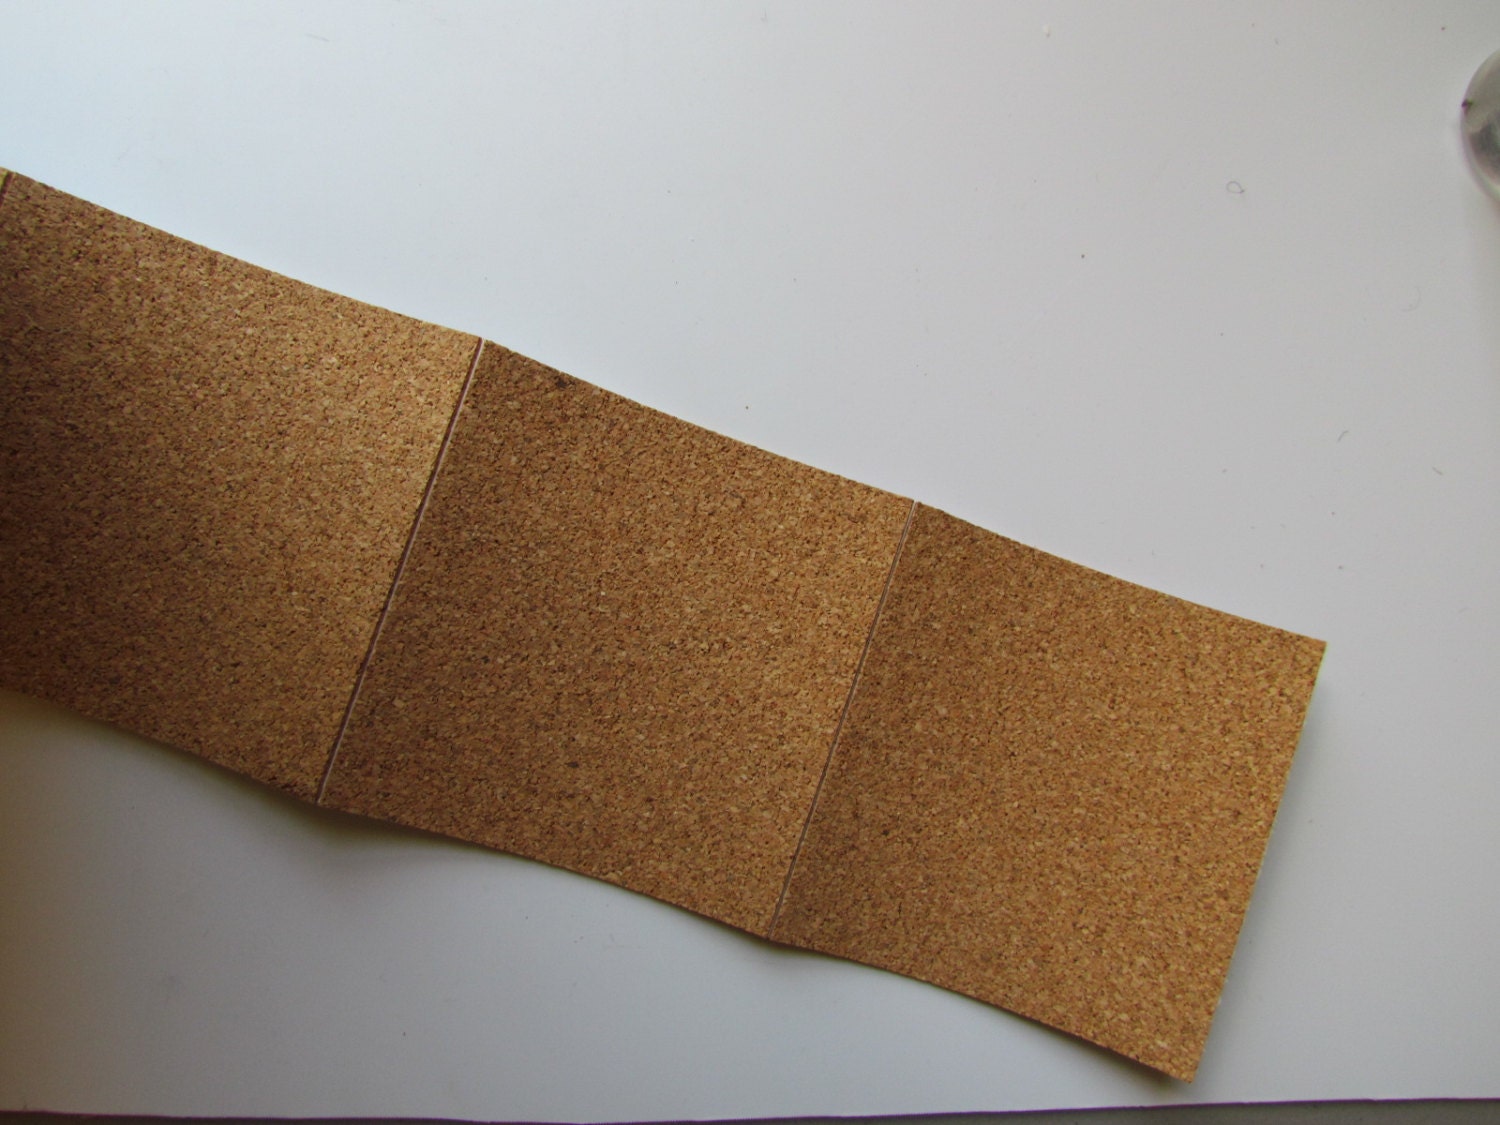 Adhesive Backed Cork for Coasters with a Kiss!